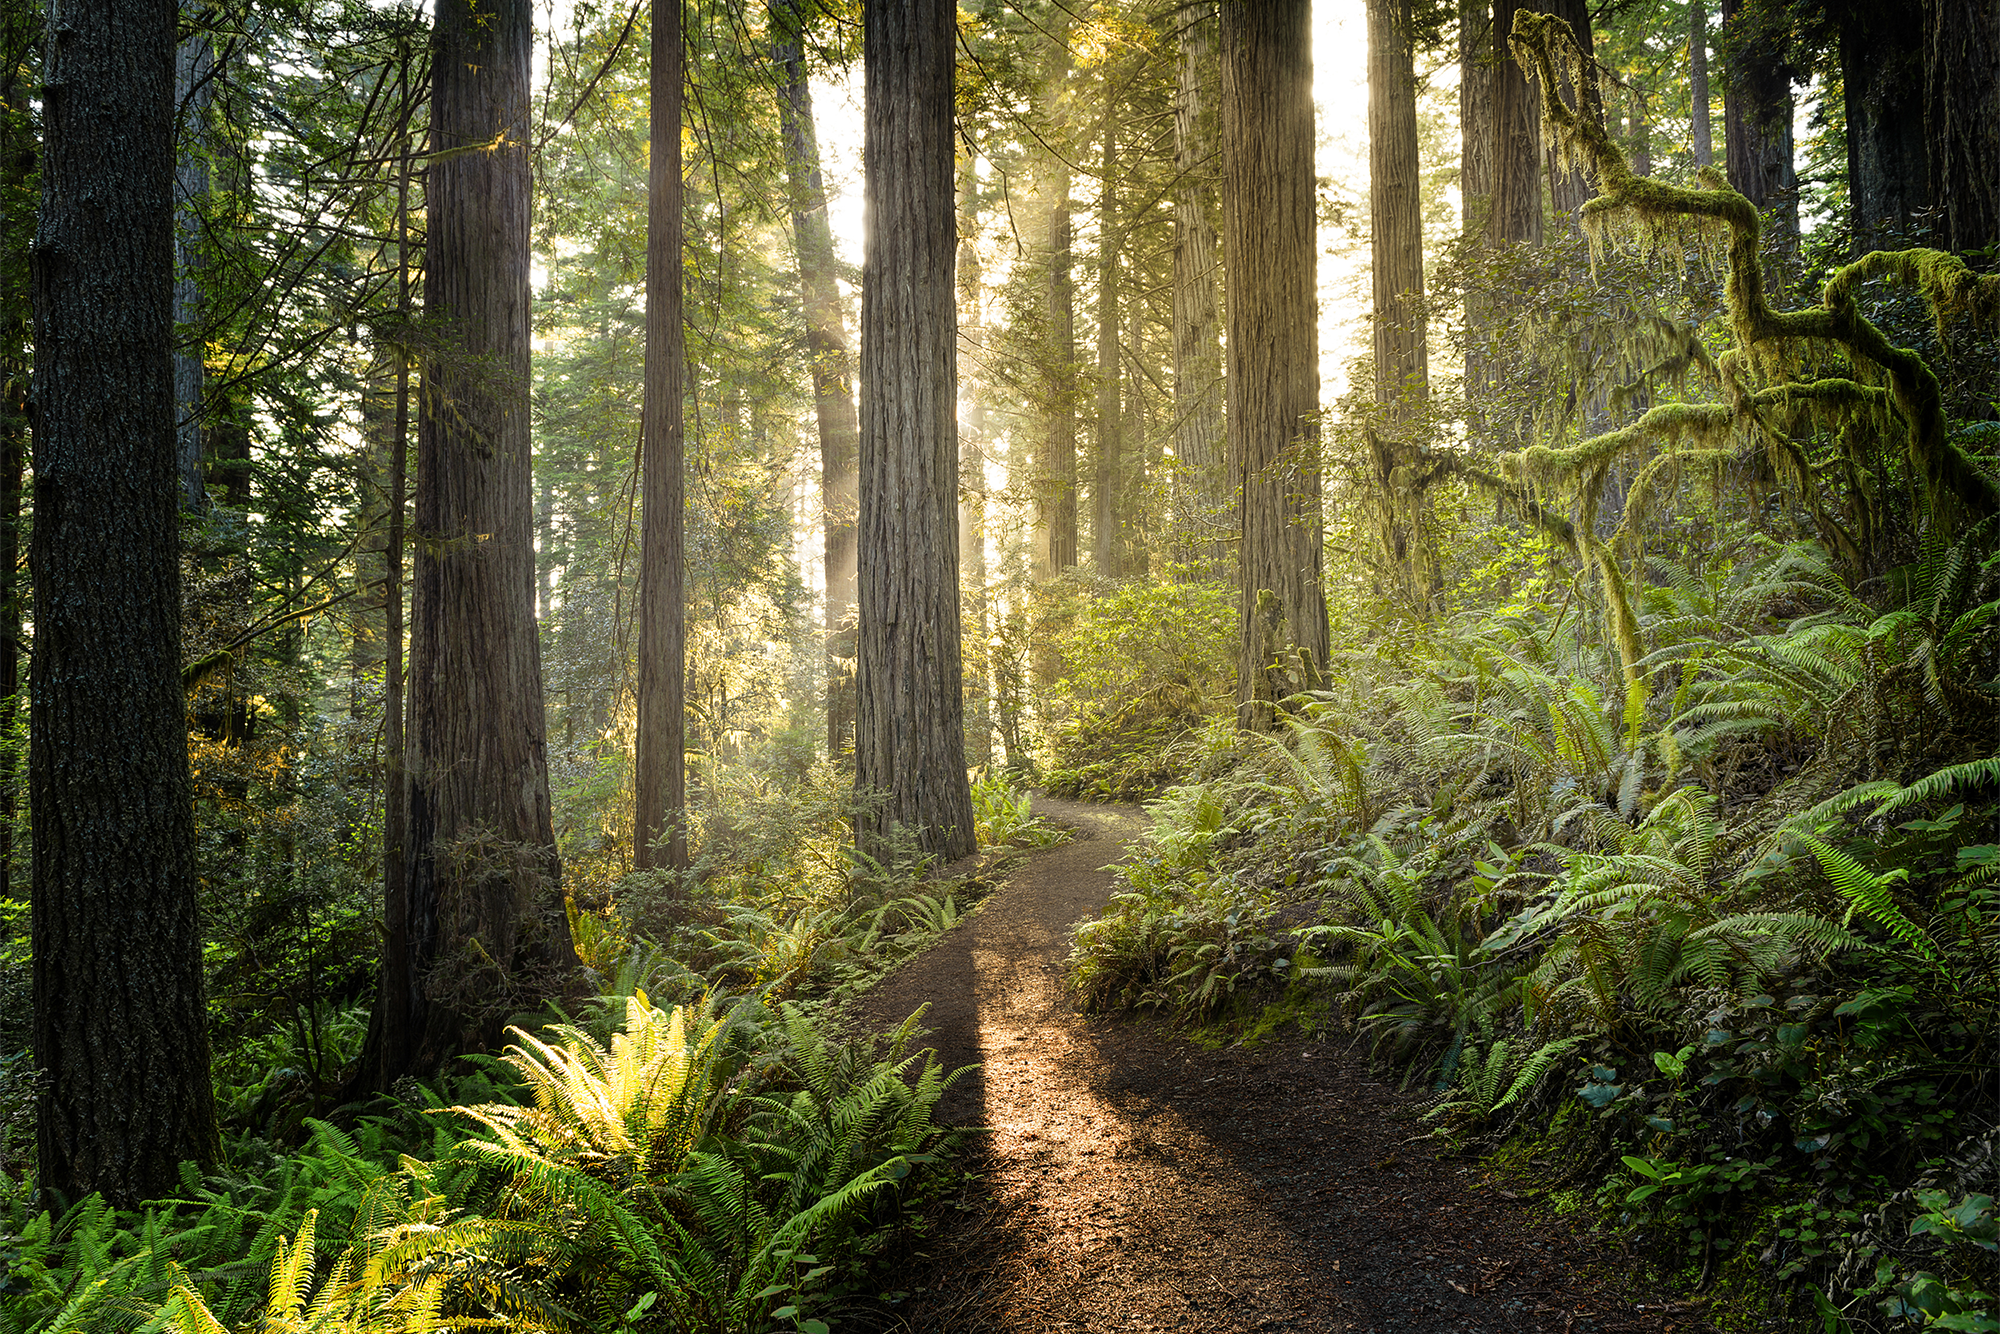 <p>Sure, <a href="https://www.nps.gov/redw/index.htm">Redwood National Park</a> is home to some of the tallest trees on Earth. But visitors will also find expansive prairies, oak woodlands, and even spectacular coastline. </p>